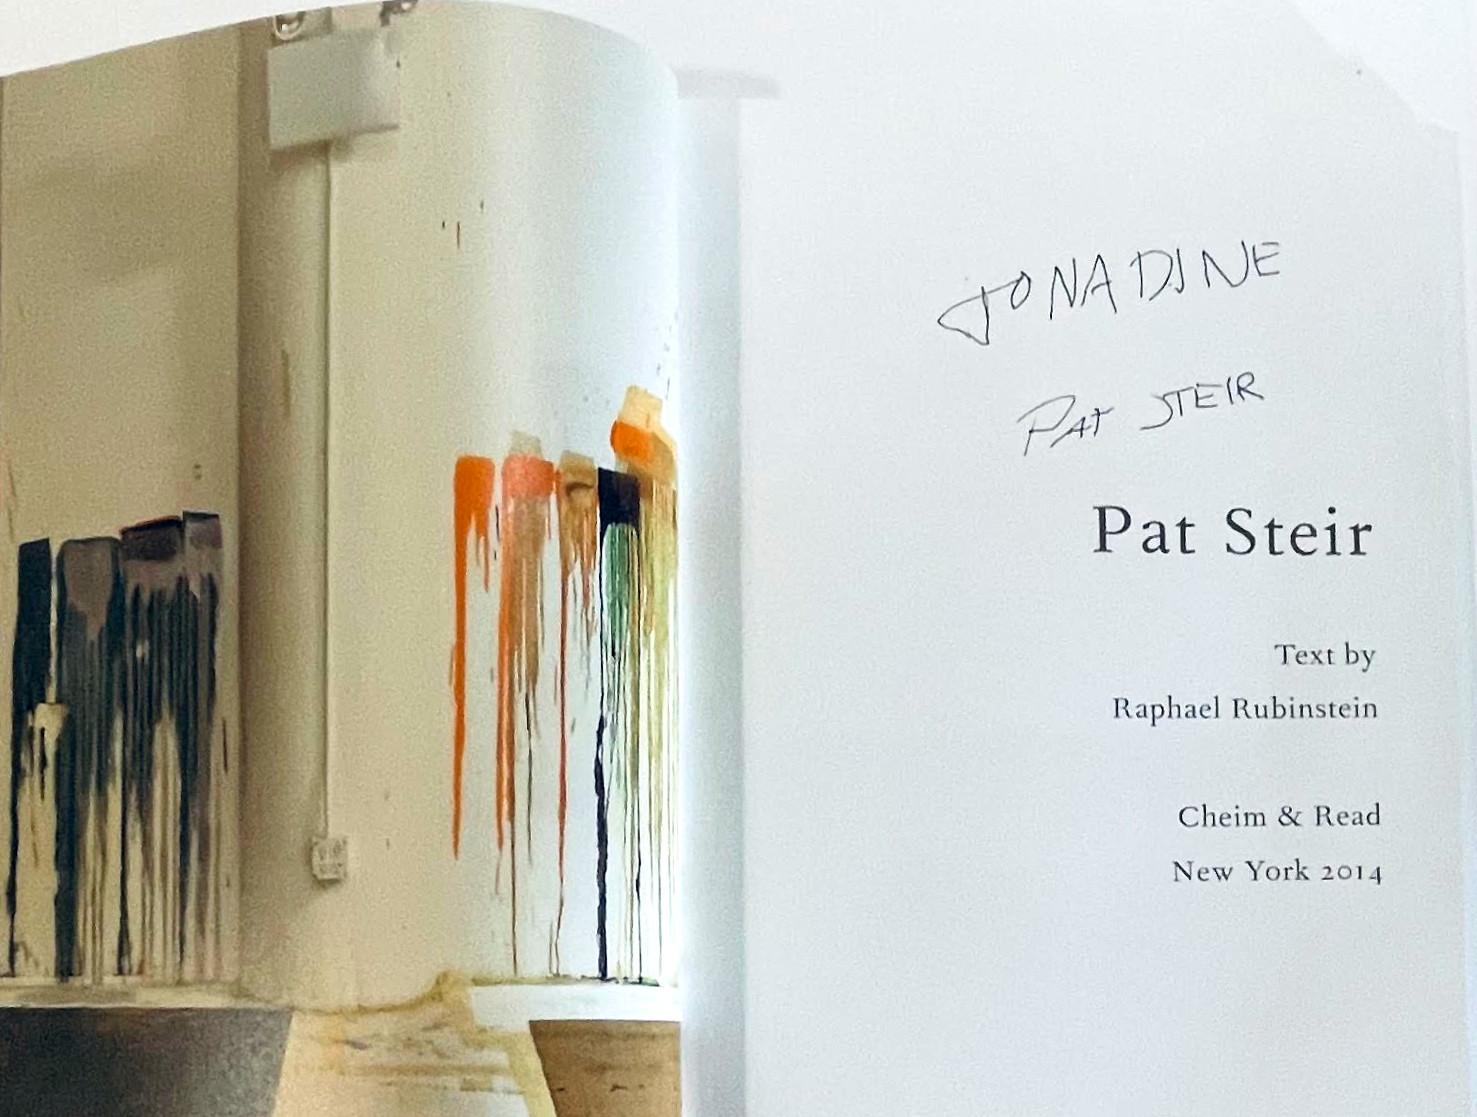 Pat Steir (Hand signed and inscribed by Pat Steir), 2014
Limited Edition clothbound hardback monograph with no dust jacket as issued (hand signed and inscribed to Nadine)
Hand signed and inscribed to Nadine by Pat Steir on the title page, 
Limited